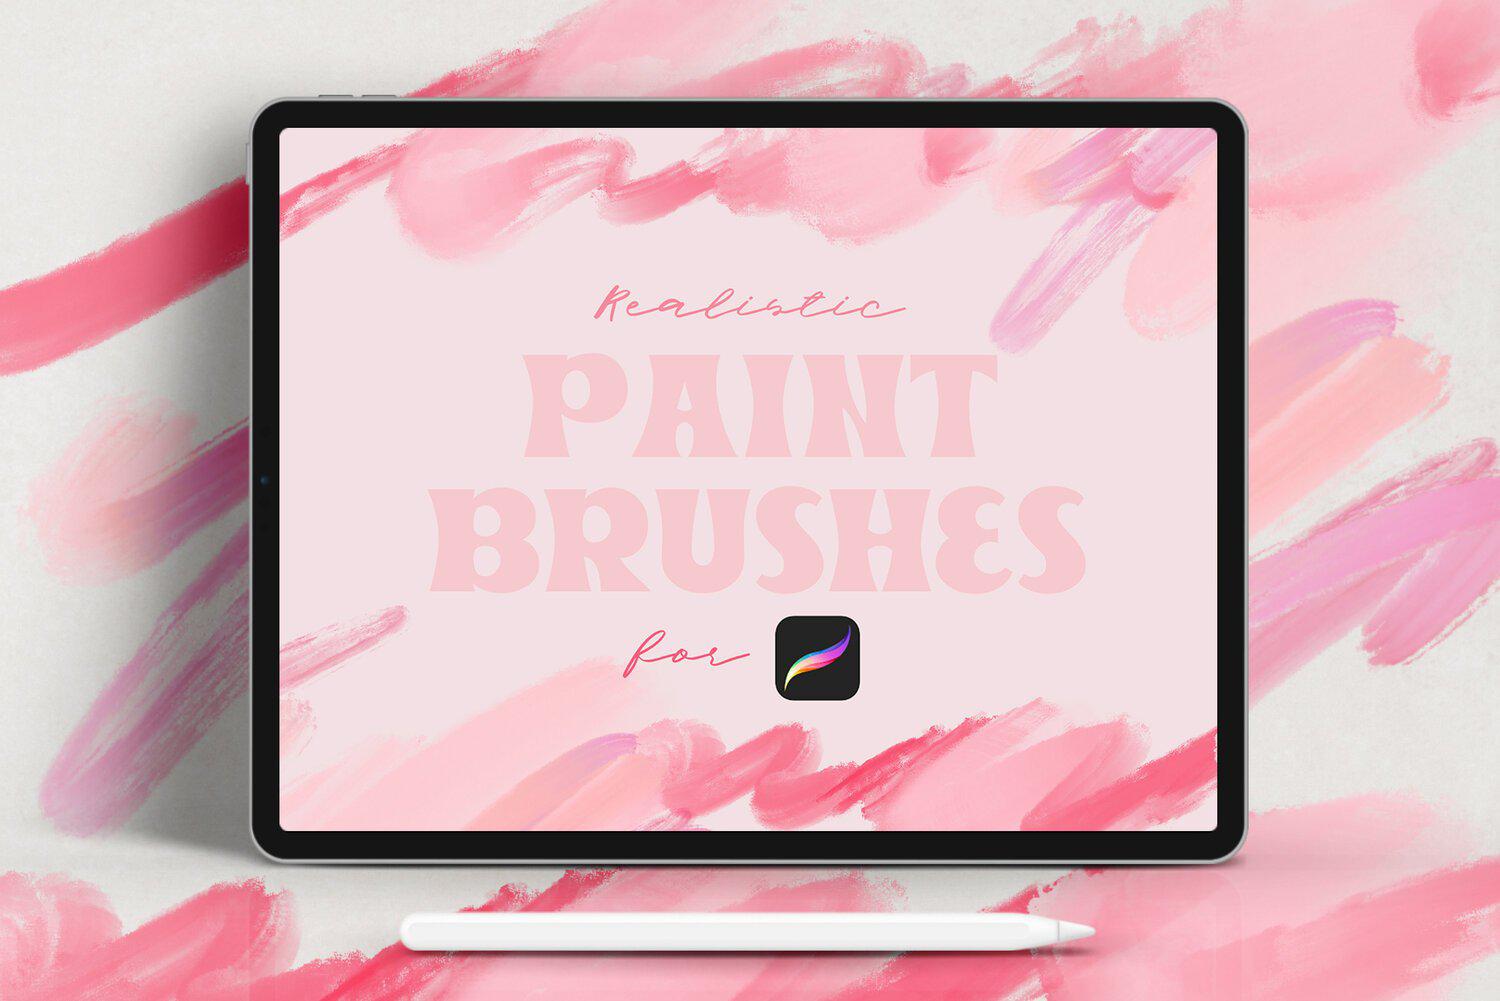 Paint Brushes for Procreate